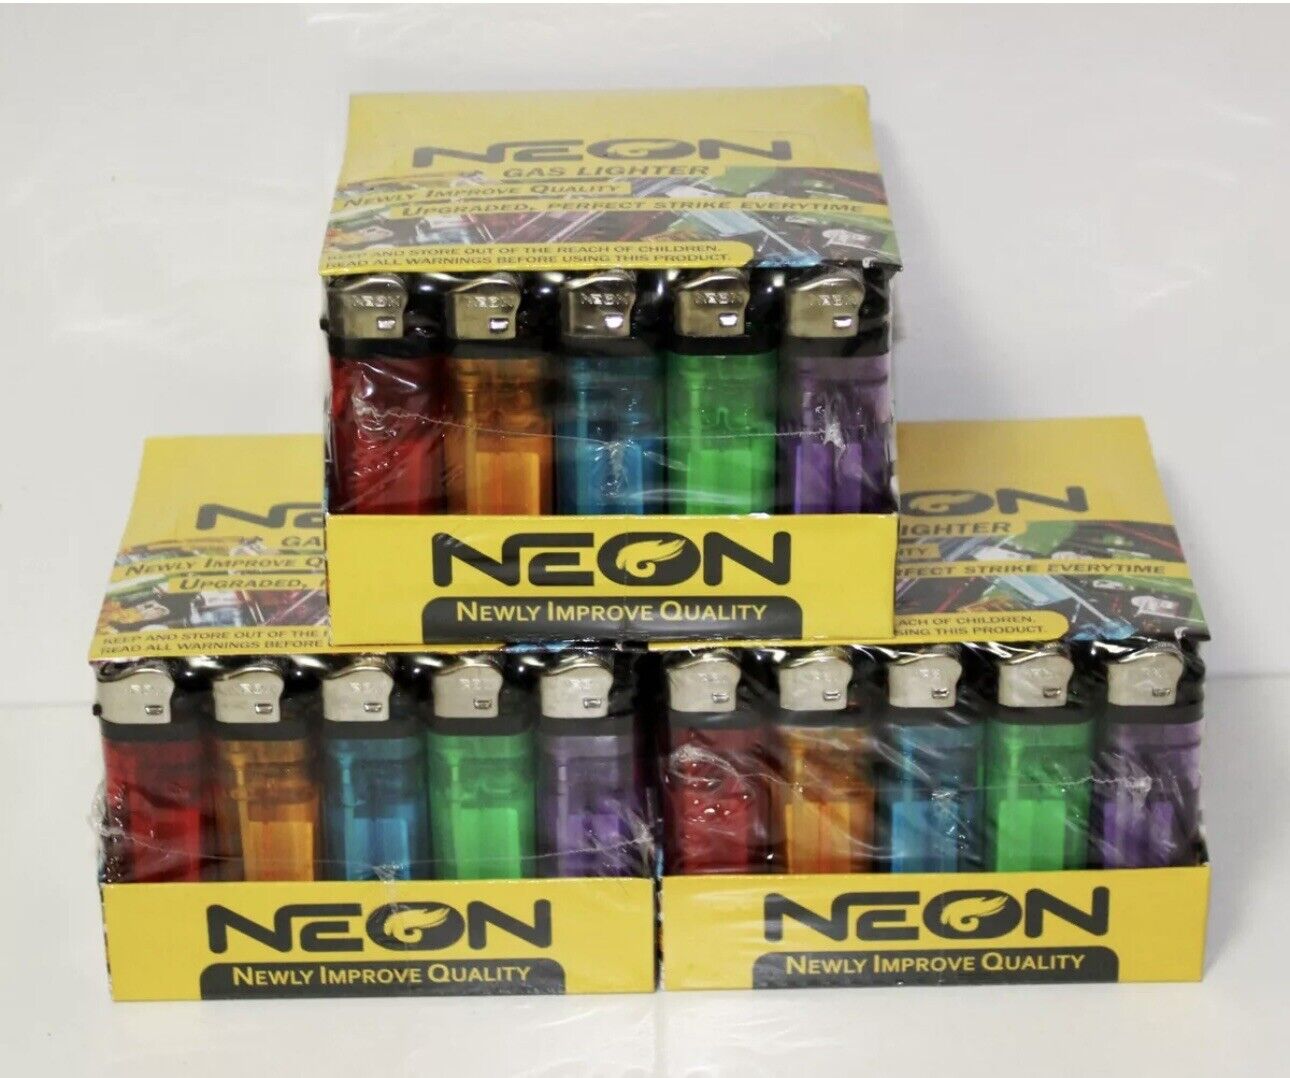 150 Disposable Lighters WHOLESALE LOT Assorted Colors NEON by MK